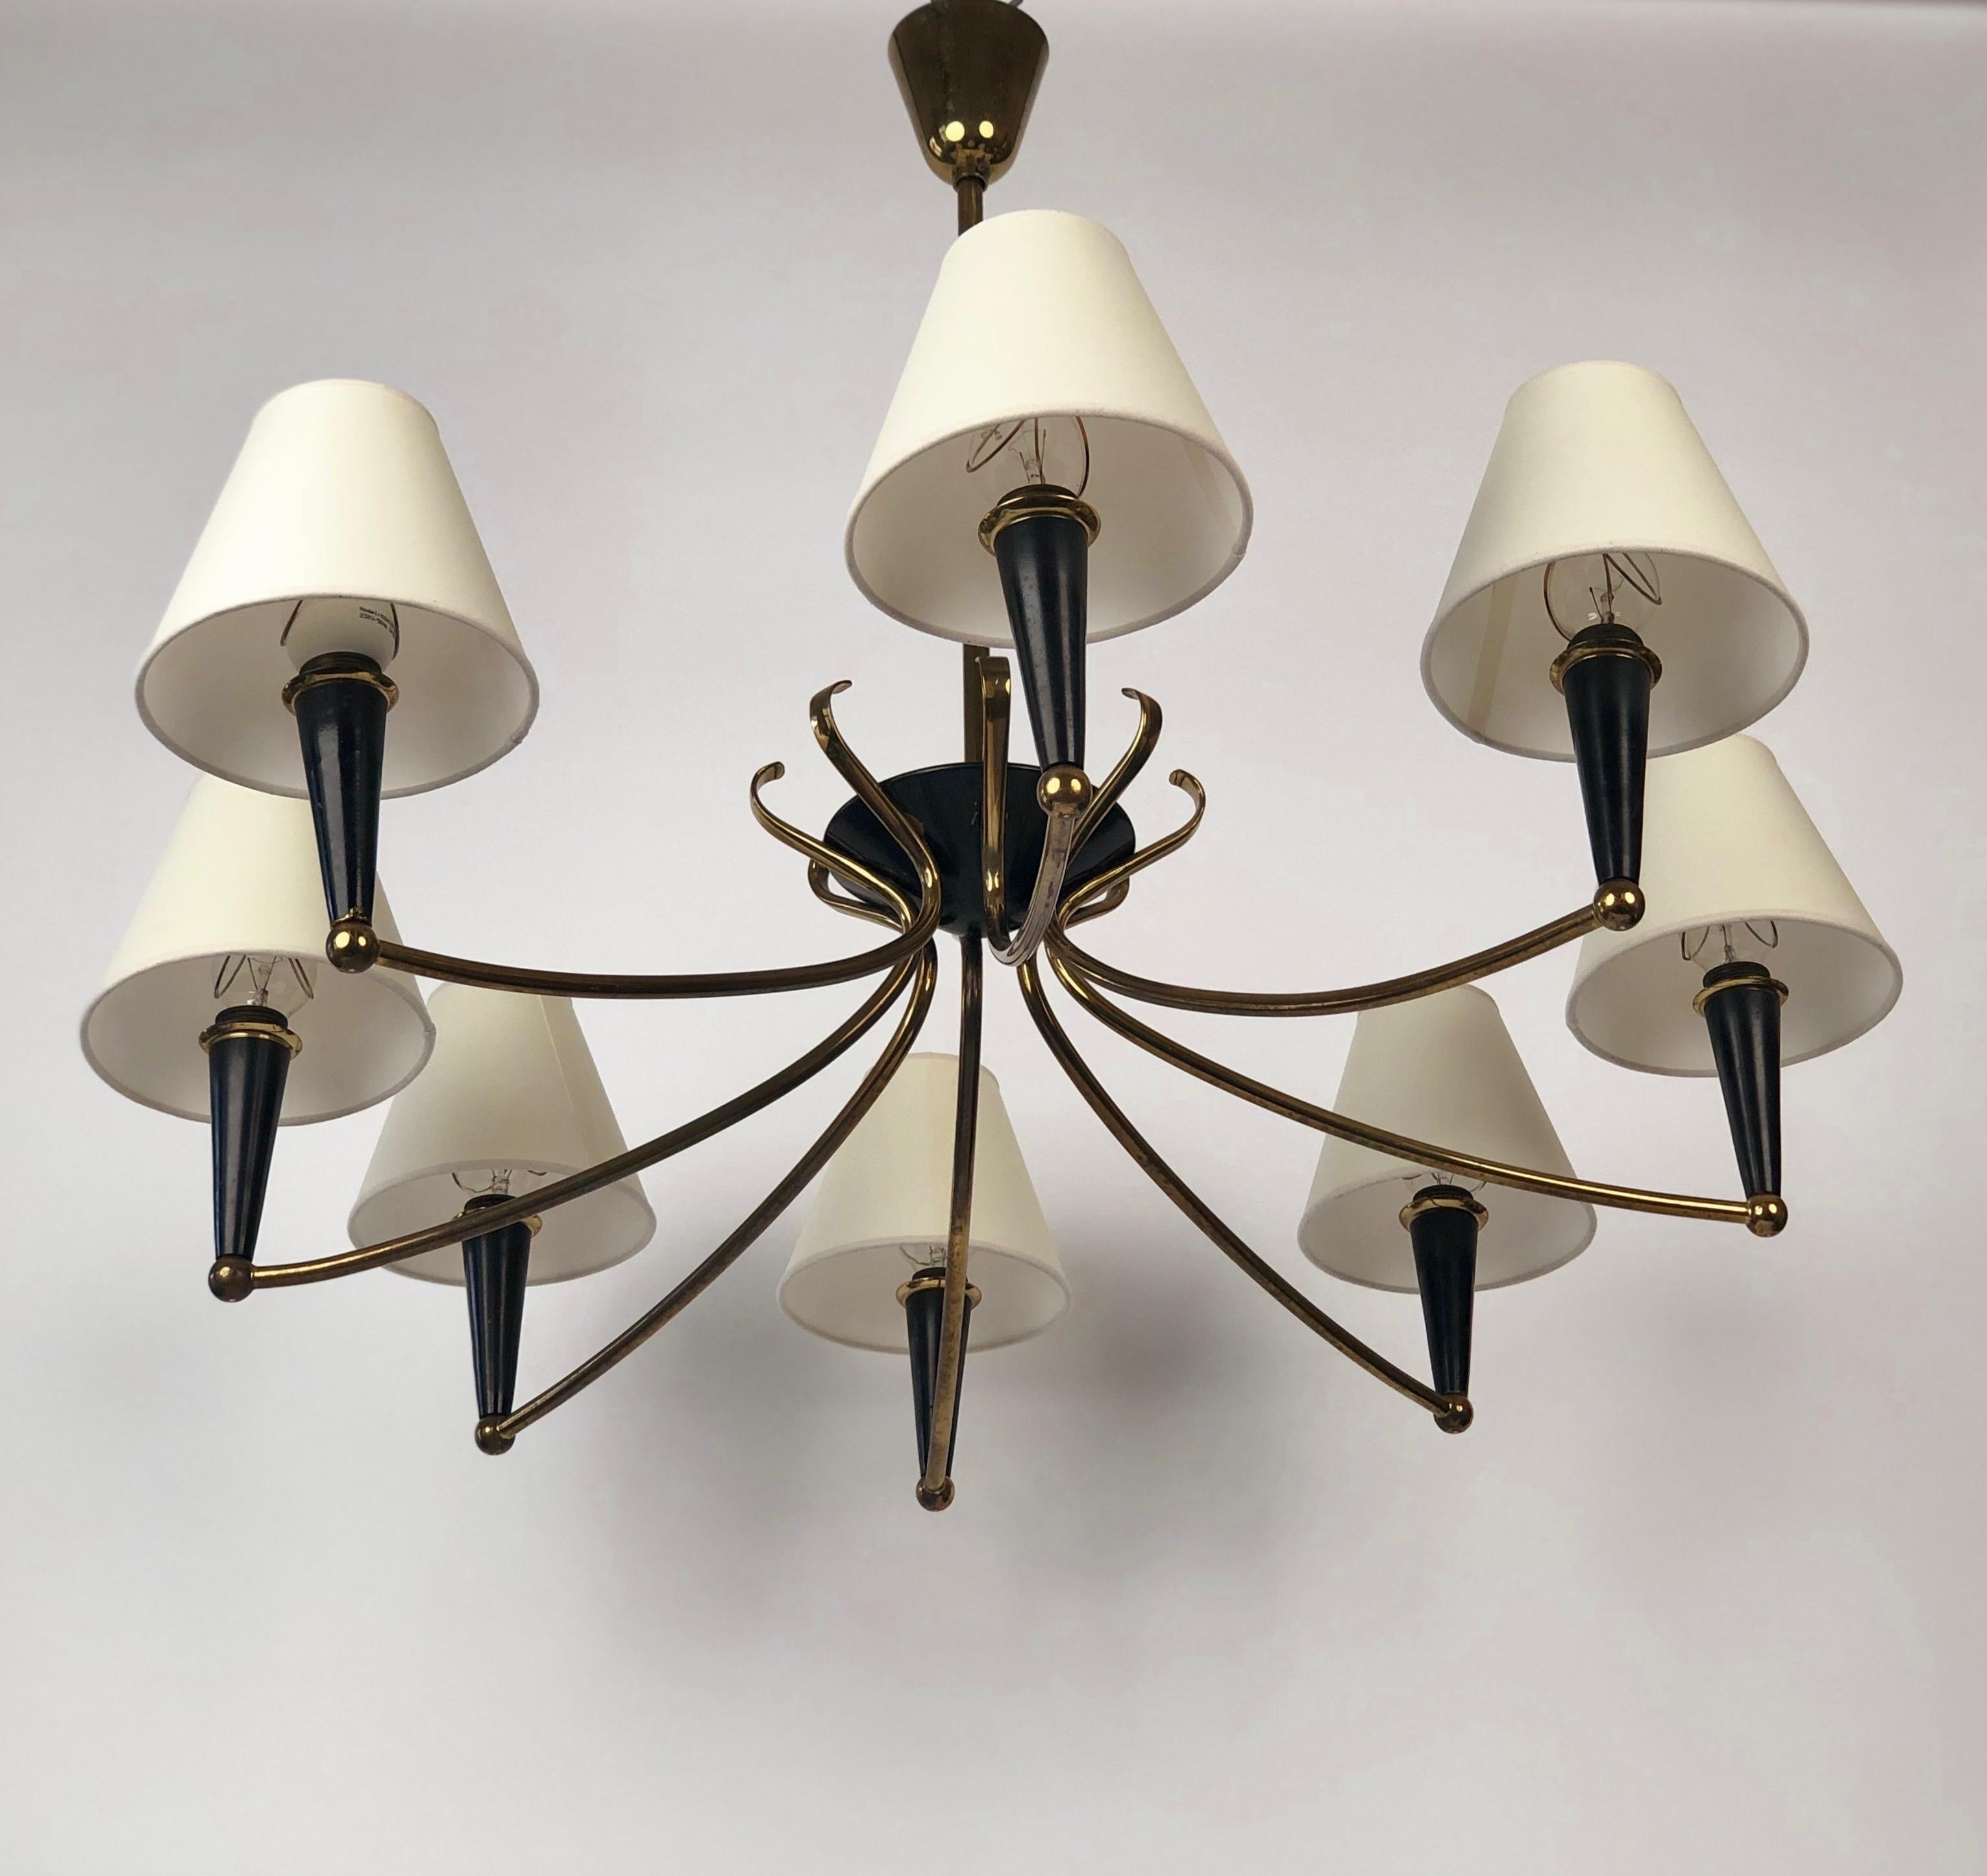 Mid-Century Modern Modern Eight Arm Chandelier from Austria with Parchment Shades, 1950's For Sale